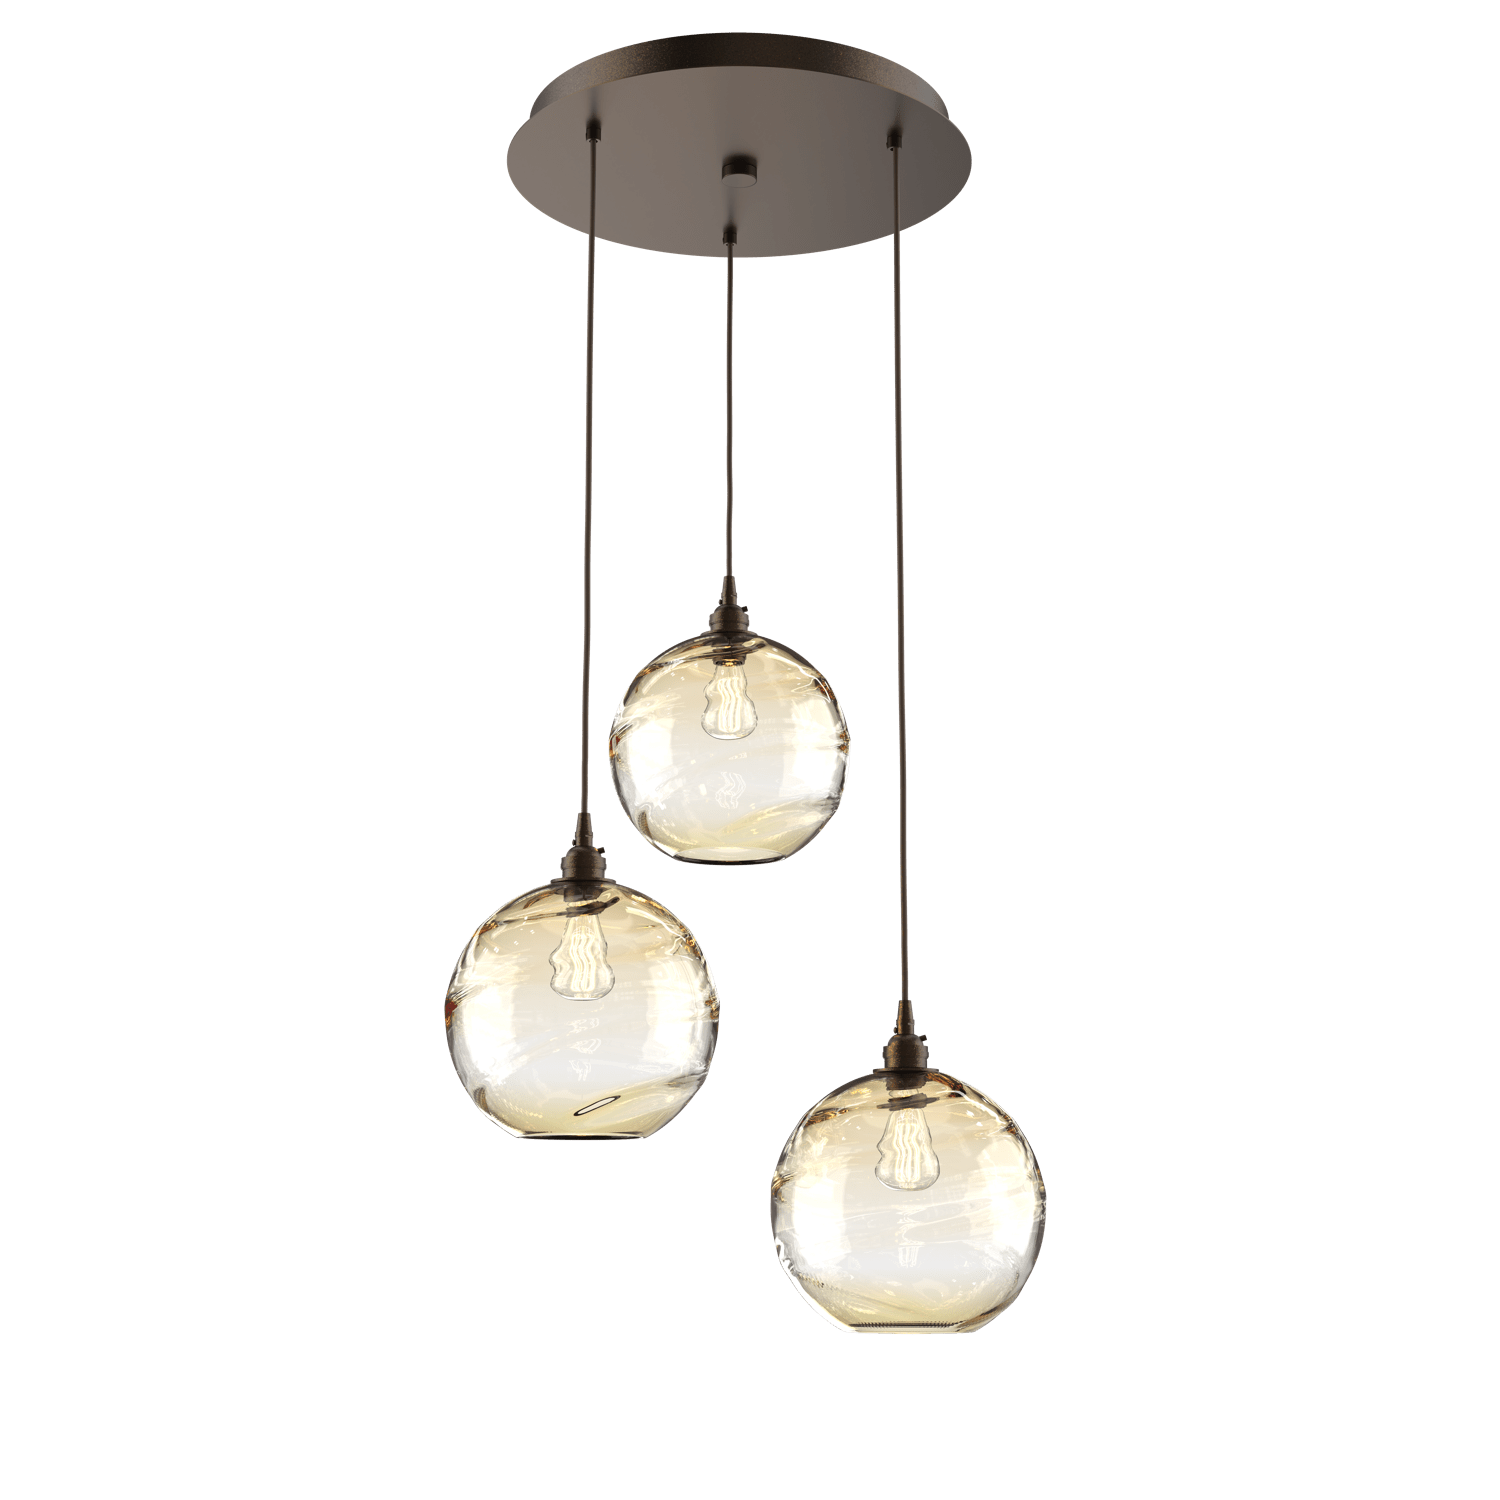 CHB0047-03-FB-OA-Hammerton-Studio-Optic-Blown-Glass-Terra-3-light-round-pendant-chandelier-with-flat-bronze-finish-and-optic-amber-blown-glass-shades-and-incandescent-lamping